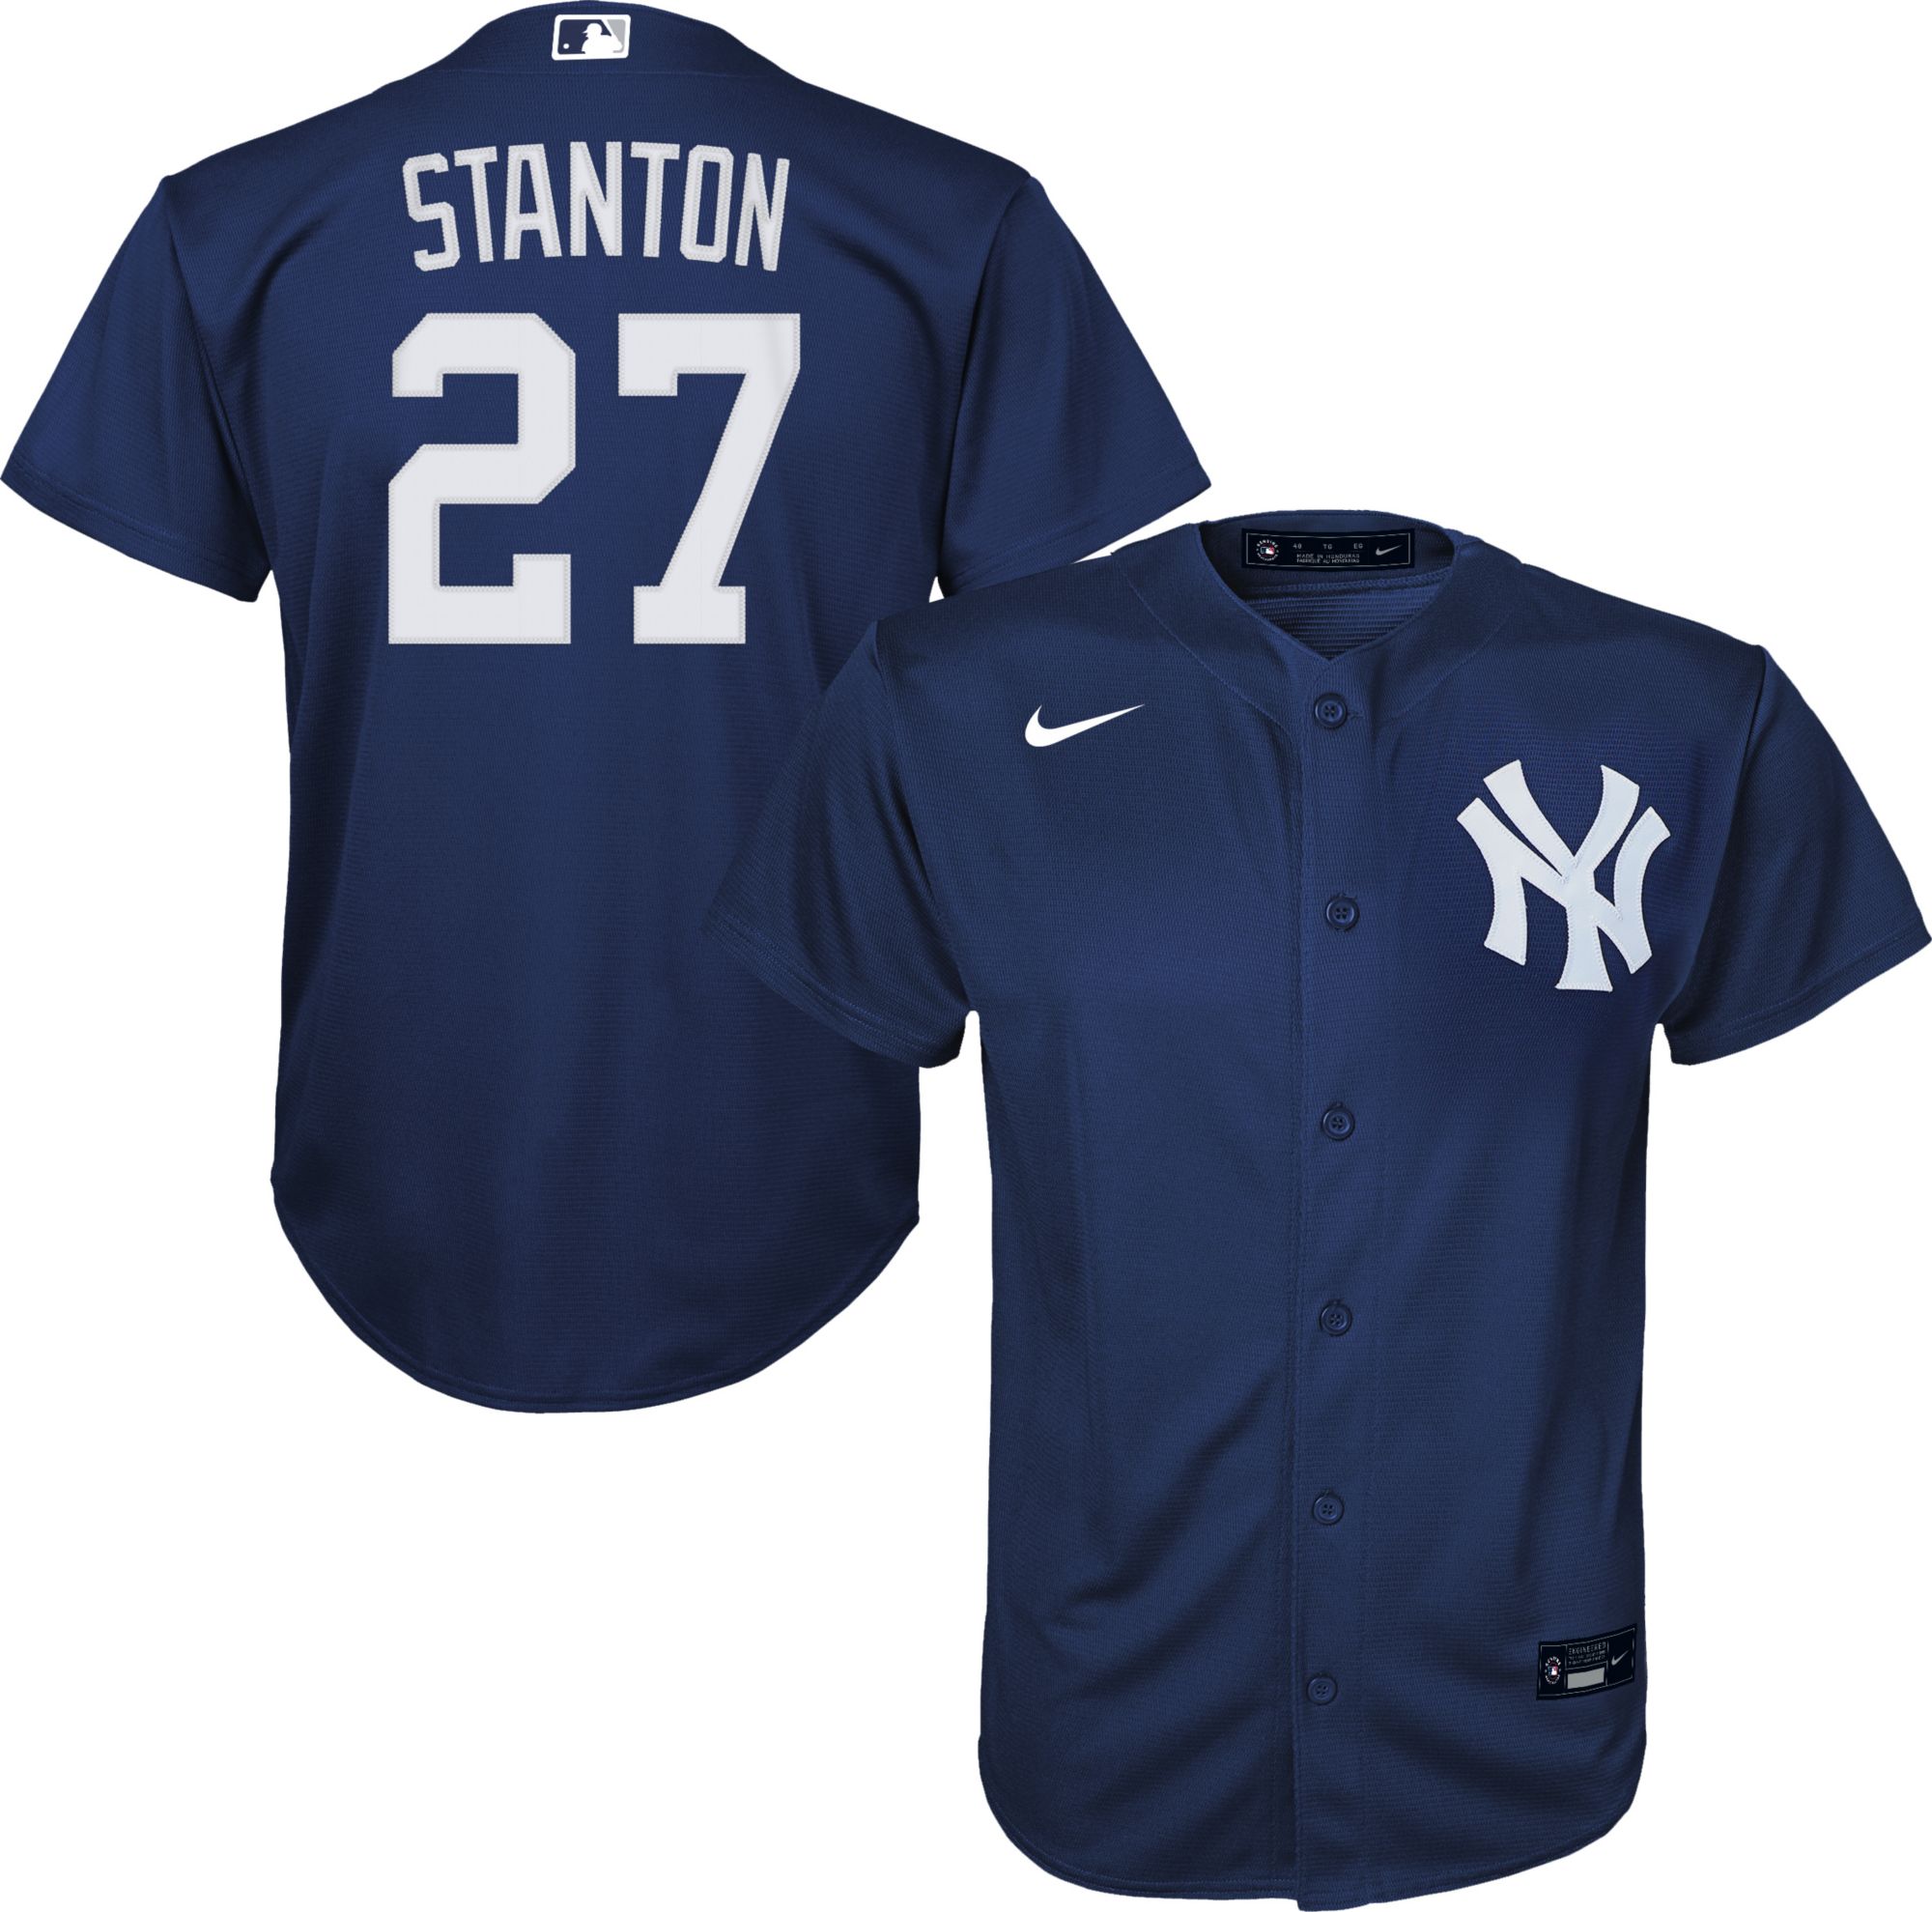 giancarlo stanton jersey youth